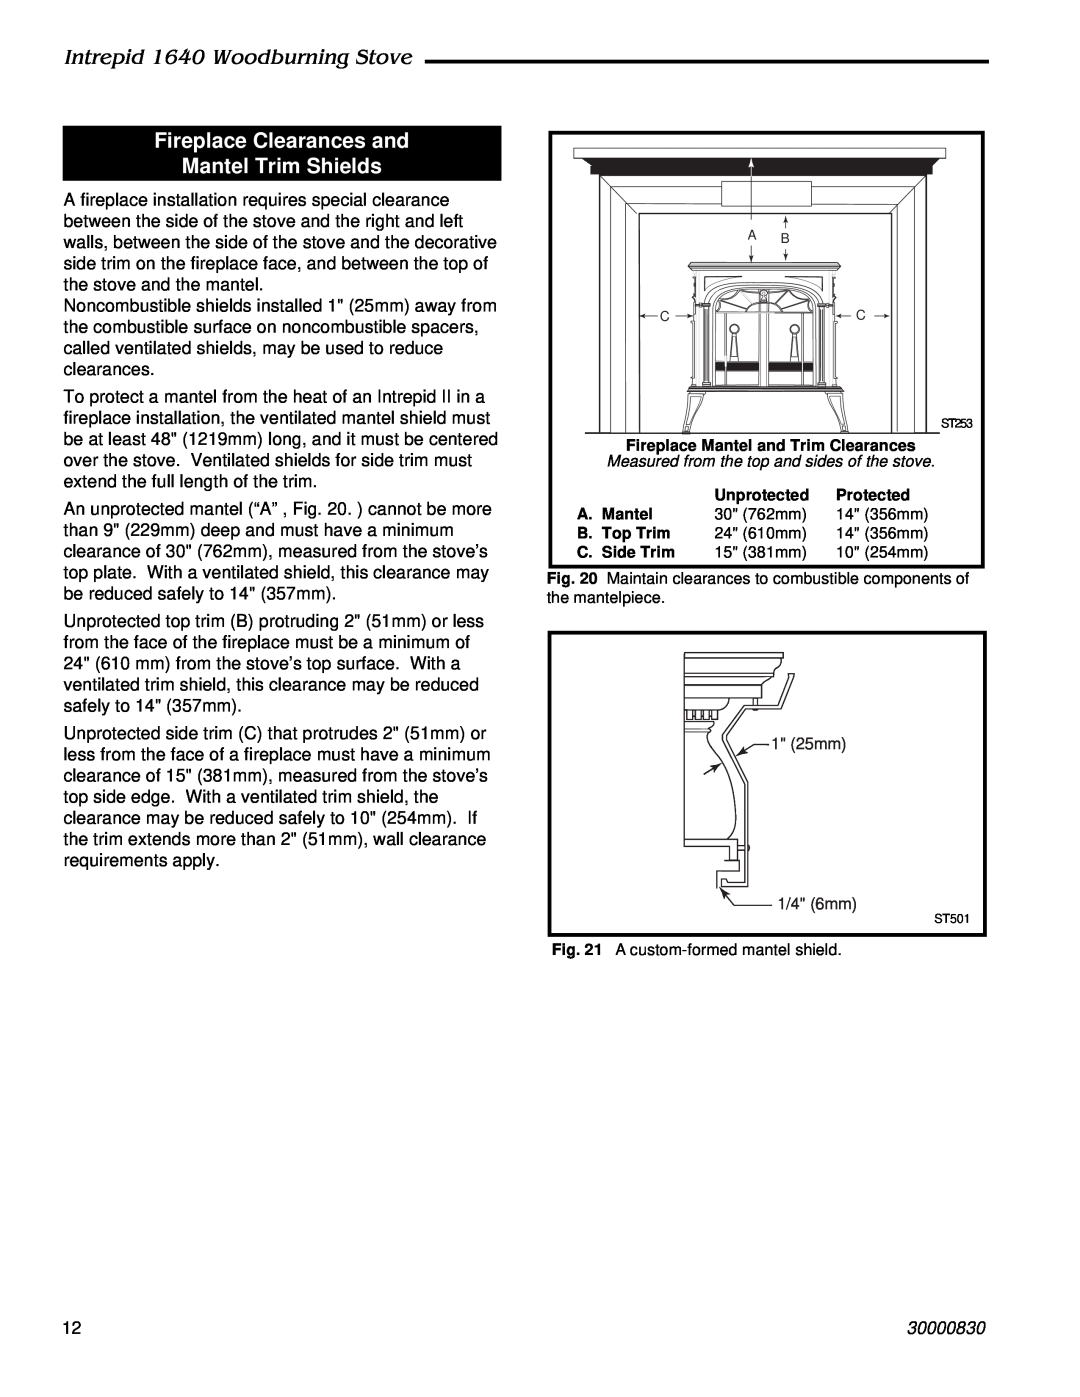 Vermont Casting installation instructions Fireplace Clearances and Mantel Trim Shields, Intrepid 1640 Woodburning Stove 